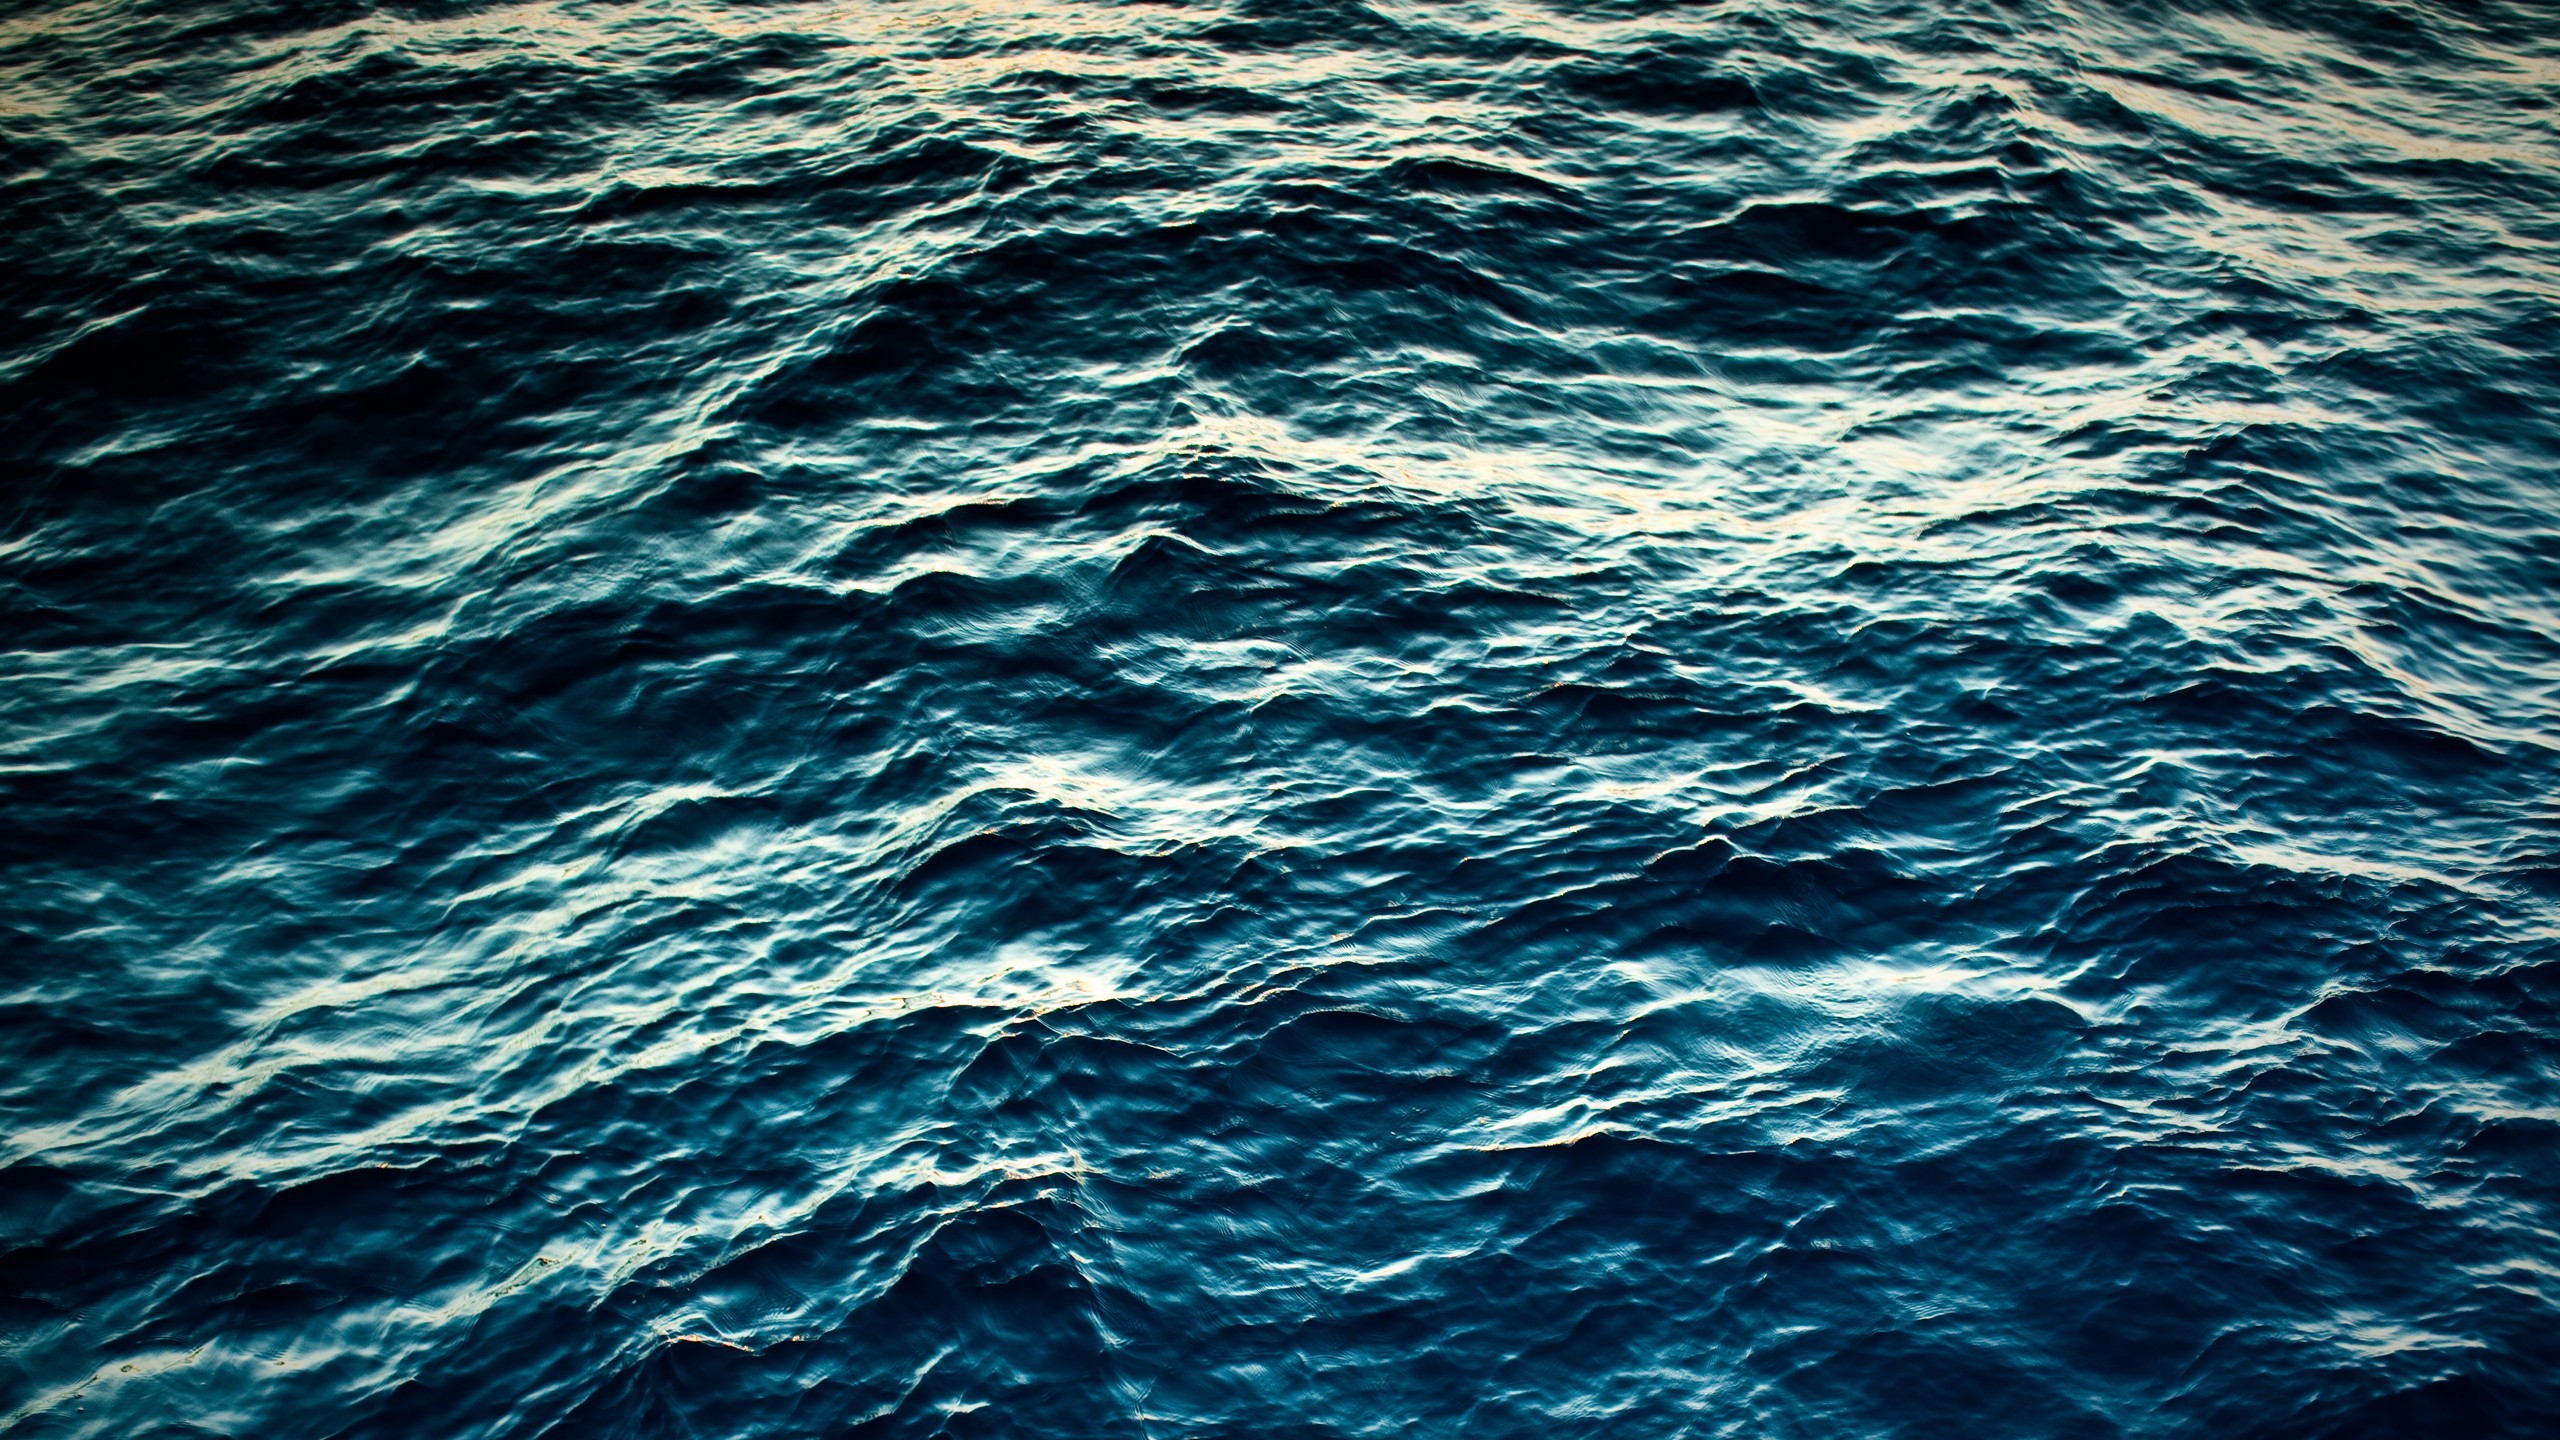 General 2560x1440 water sea blue nature